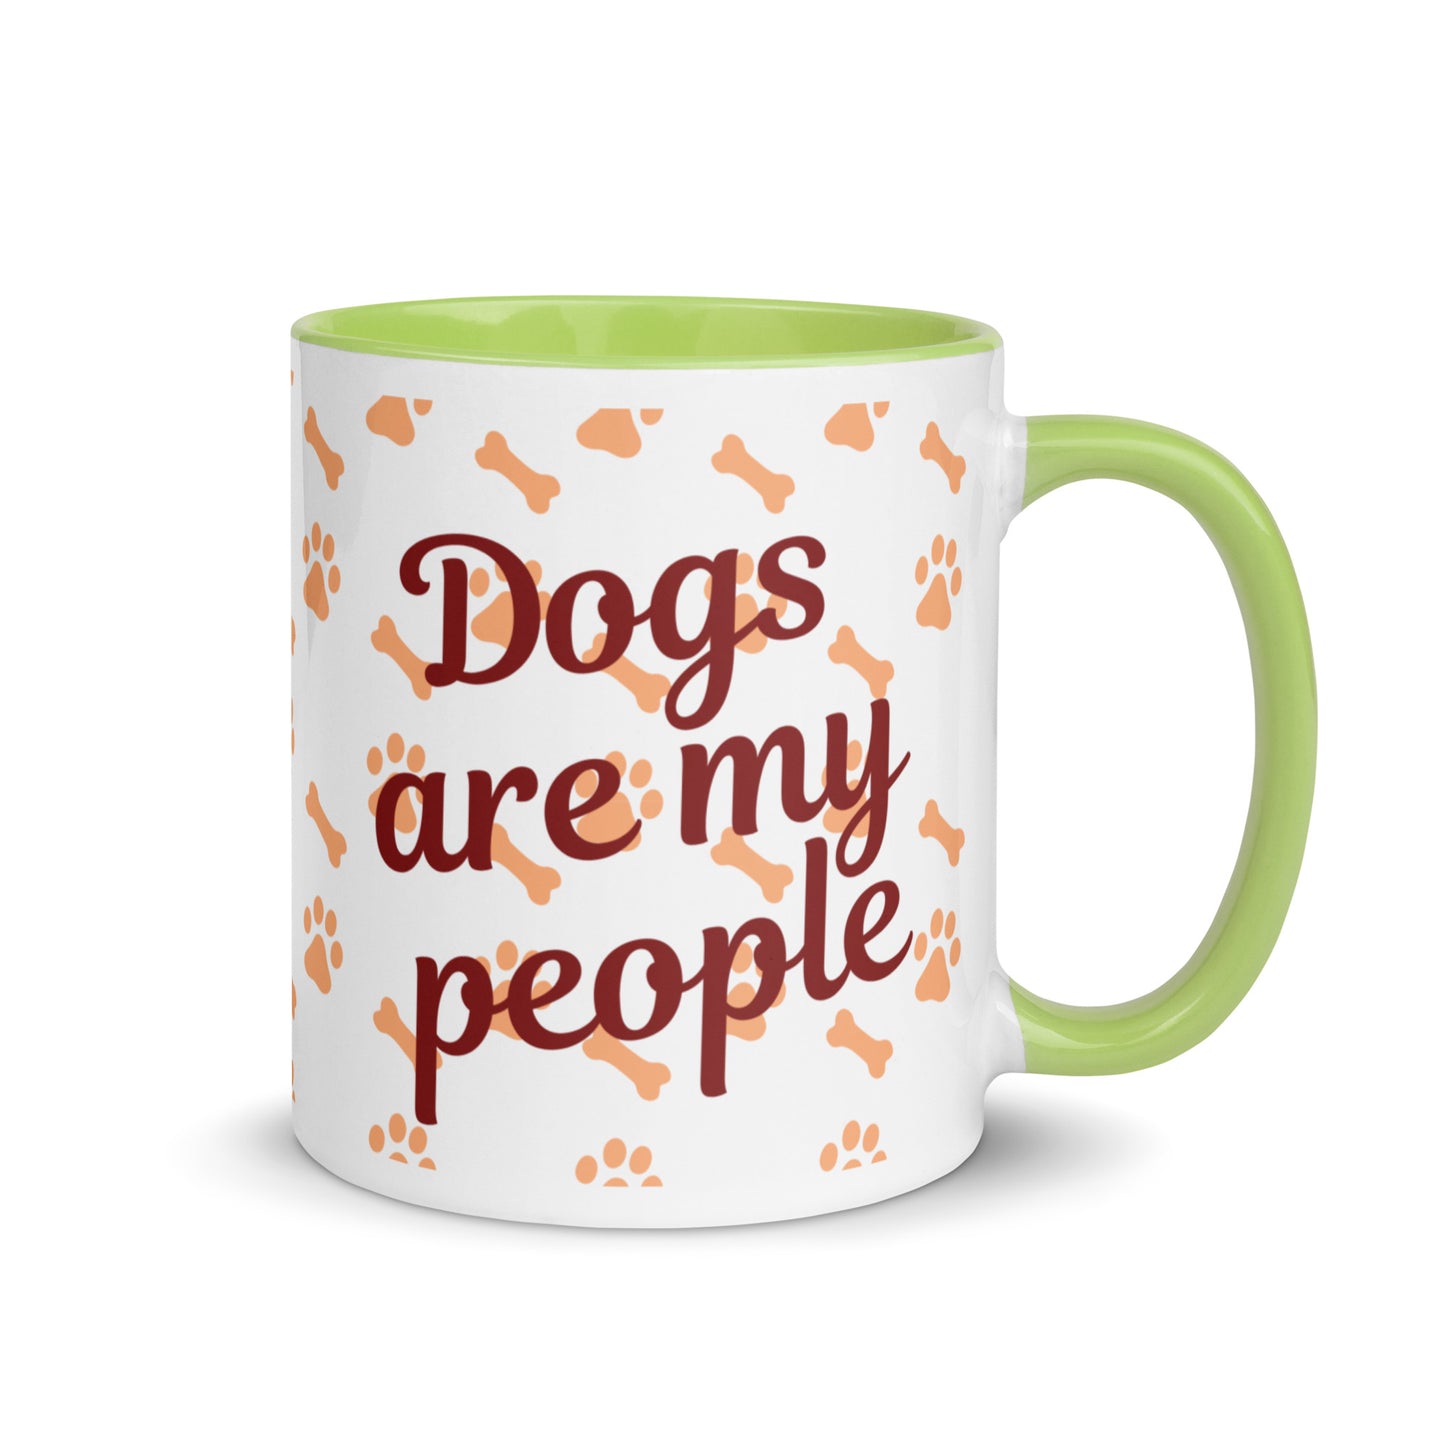 Dogs Are My People - Dog Lovers Mug - red with color inside